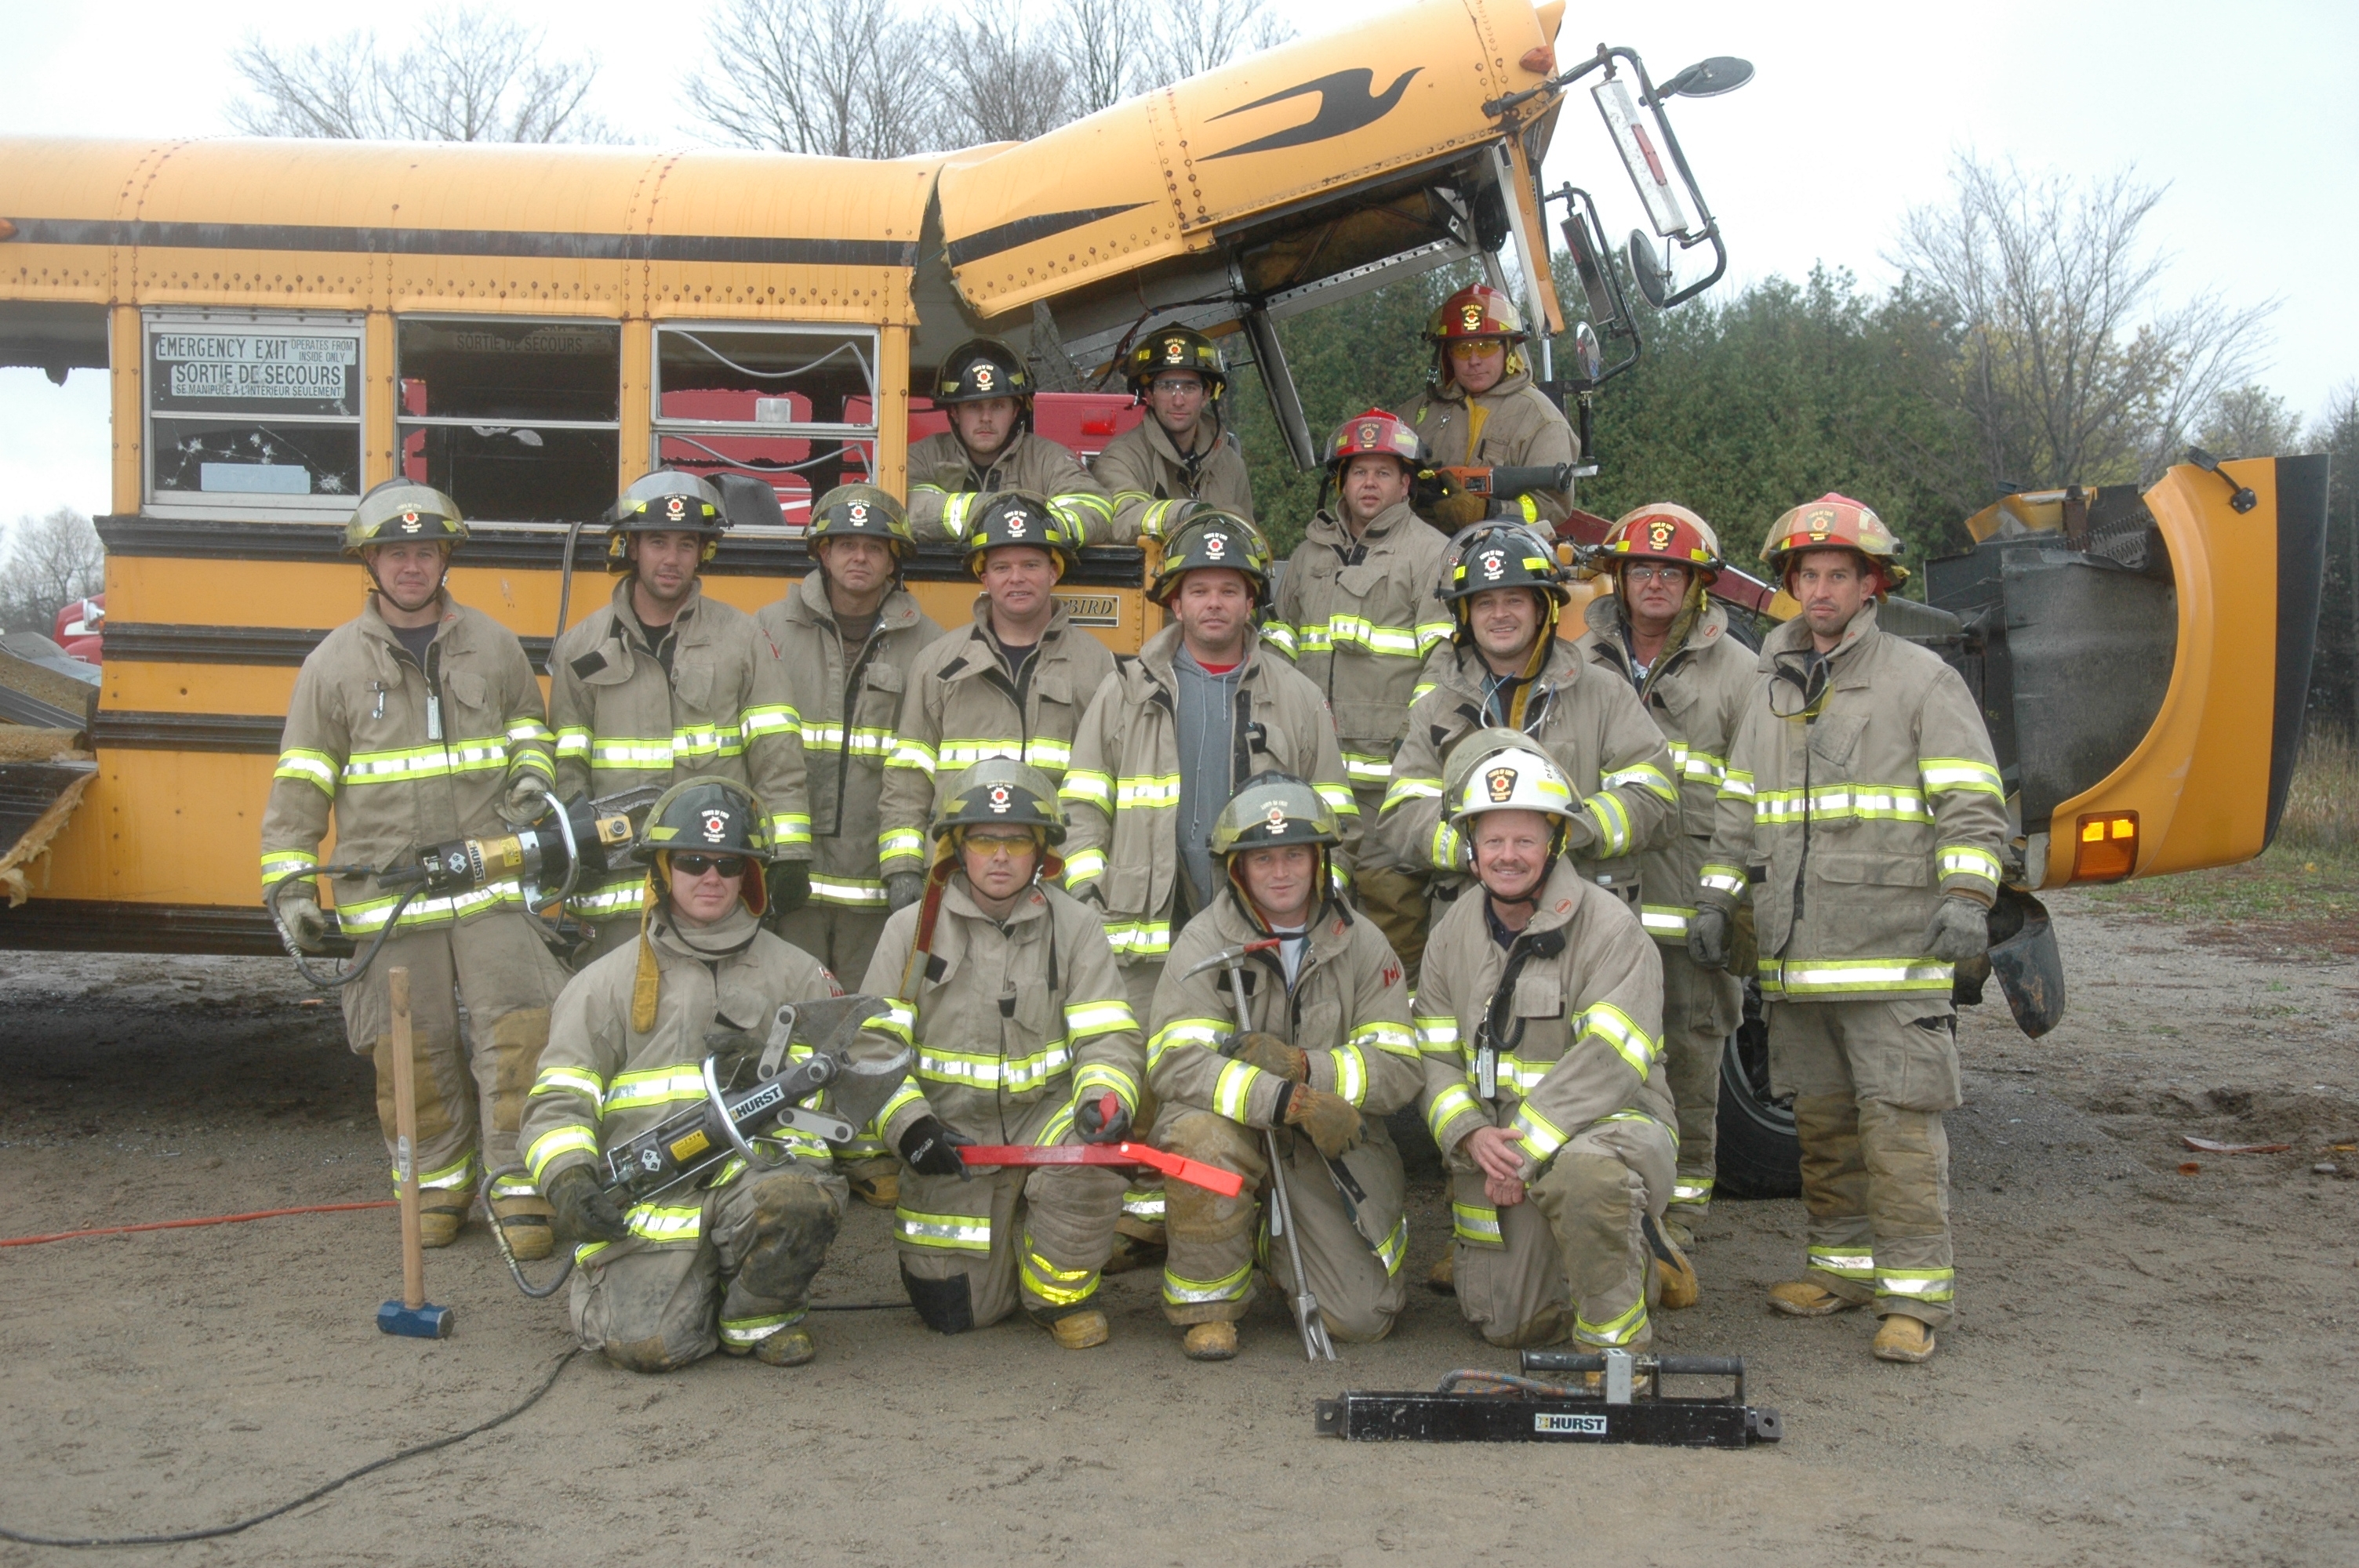 Firefighters participated in School Bus Emergency Training